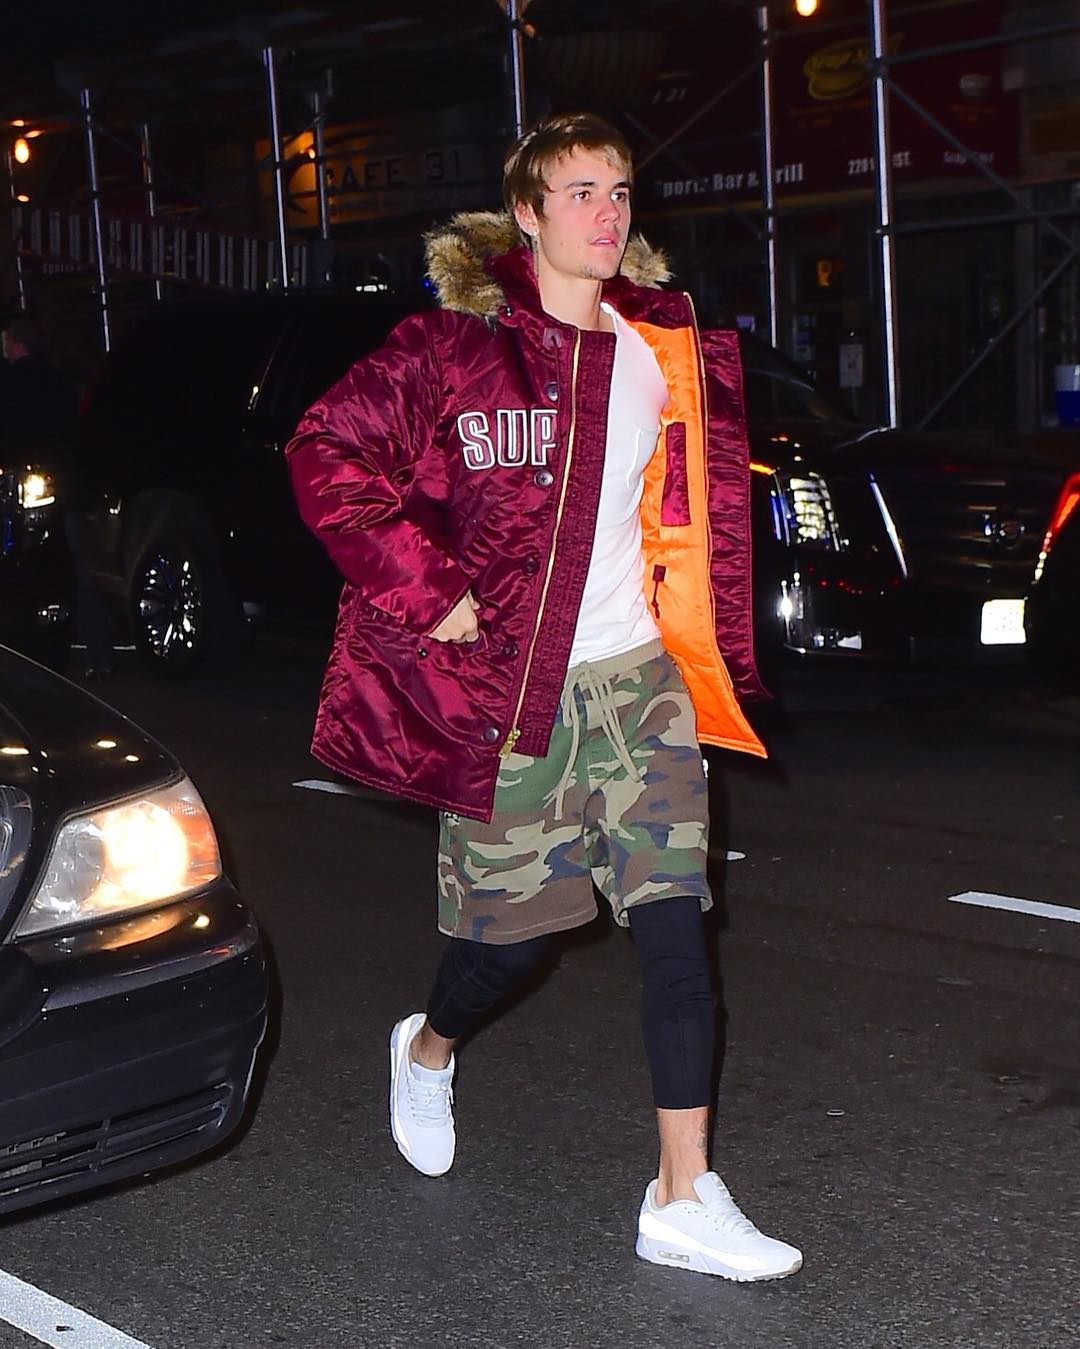 SPOTTED: Justin Bieber in Supreme and F.O.G